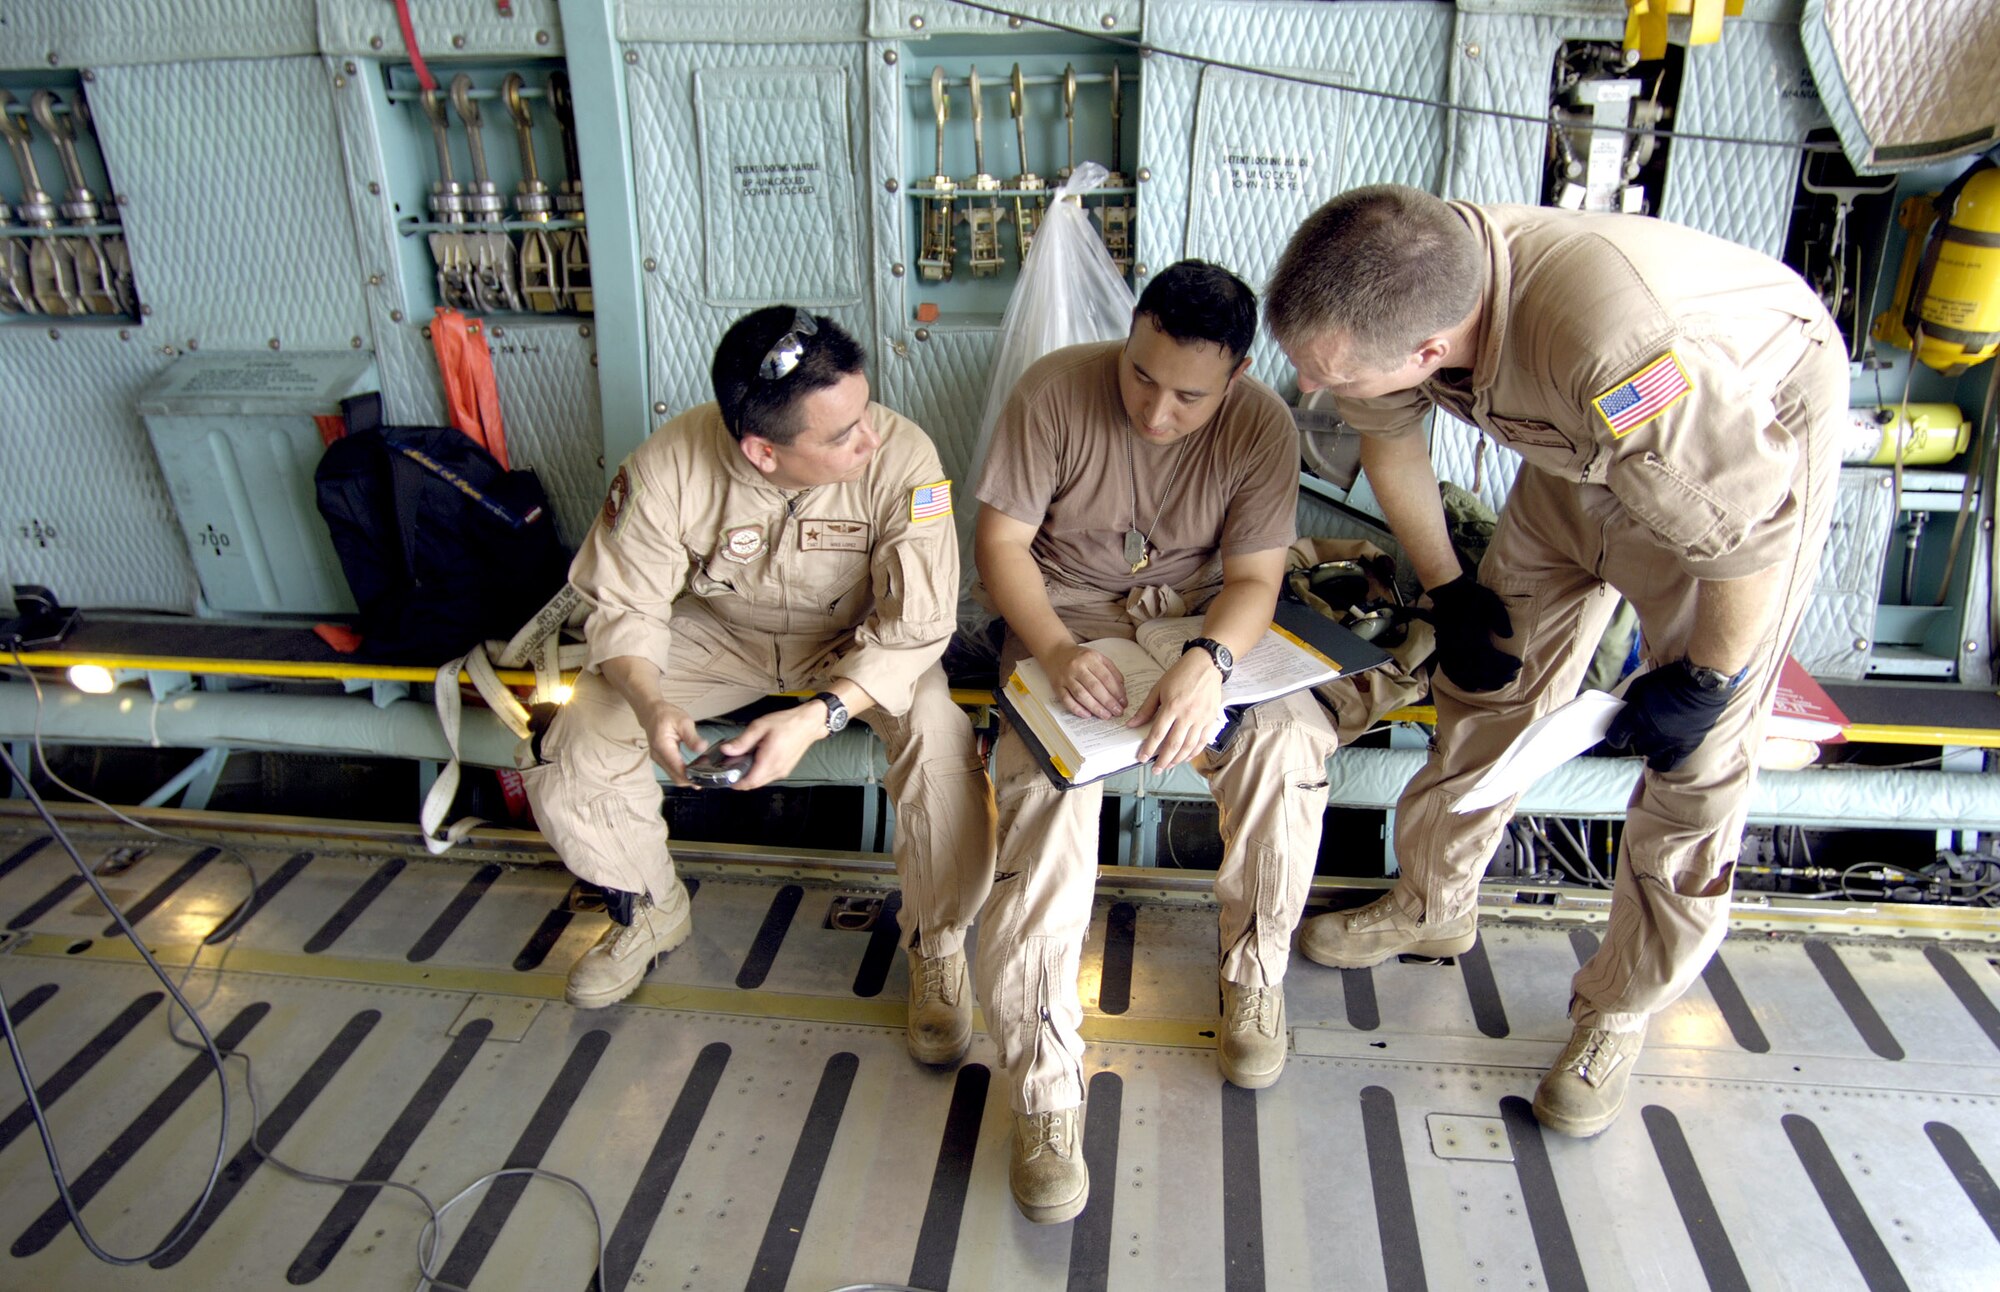 HICKAM AIR FORCE BASE, Hawaii -- Loadmasters Tech. Sgt. Mike Lopez, Senior Airman Marcial Cadena and Staff Sgt. Joe Nicholes, check a technical order before loading a CH-47 Chinook heavy lift helicopter onto their C-5 Galaxy here. The Airmen from the Air Force Reserve 433rd Airlift Wing, Lackland Air Force Base, Texas, helped ferry 60 troops, four helicopters and support equipment to Pakistan to support earthquake relief operations Oct. 16. The Soldiers are from Company B, 214th Aviation Regiment of the 2nd Battalion, 25th Aviation Regiment at nearby Wheeler Army Air Field. (U.S. Air Force photo by Tech. Sgt. Shane A. Cuomo)